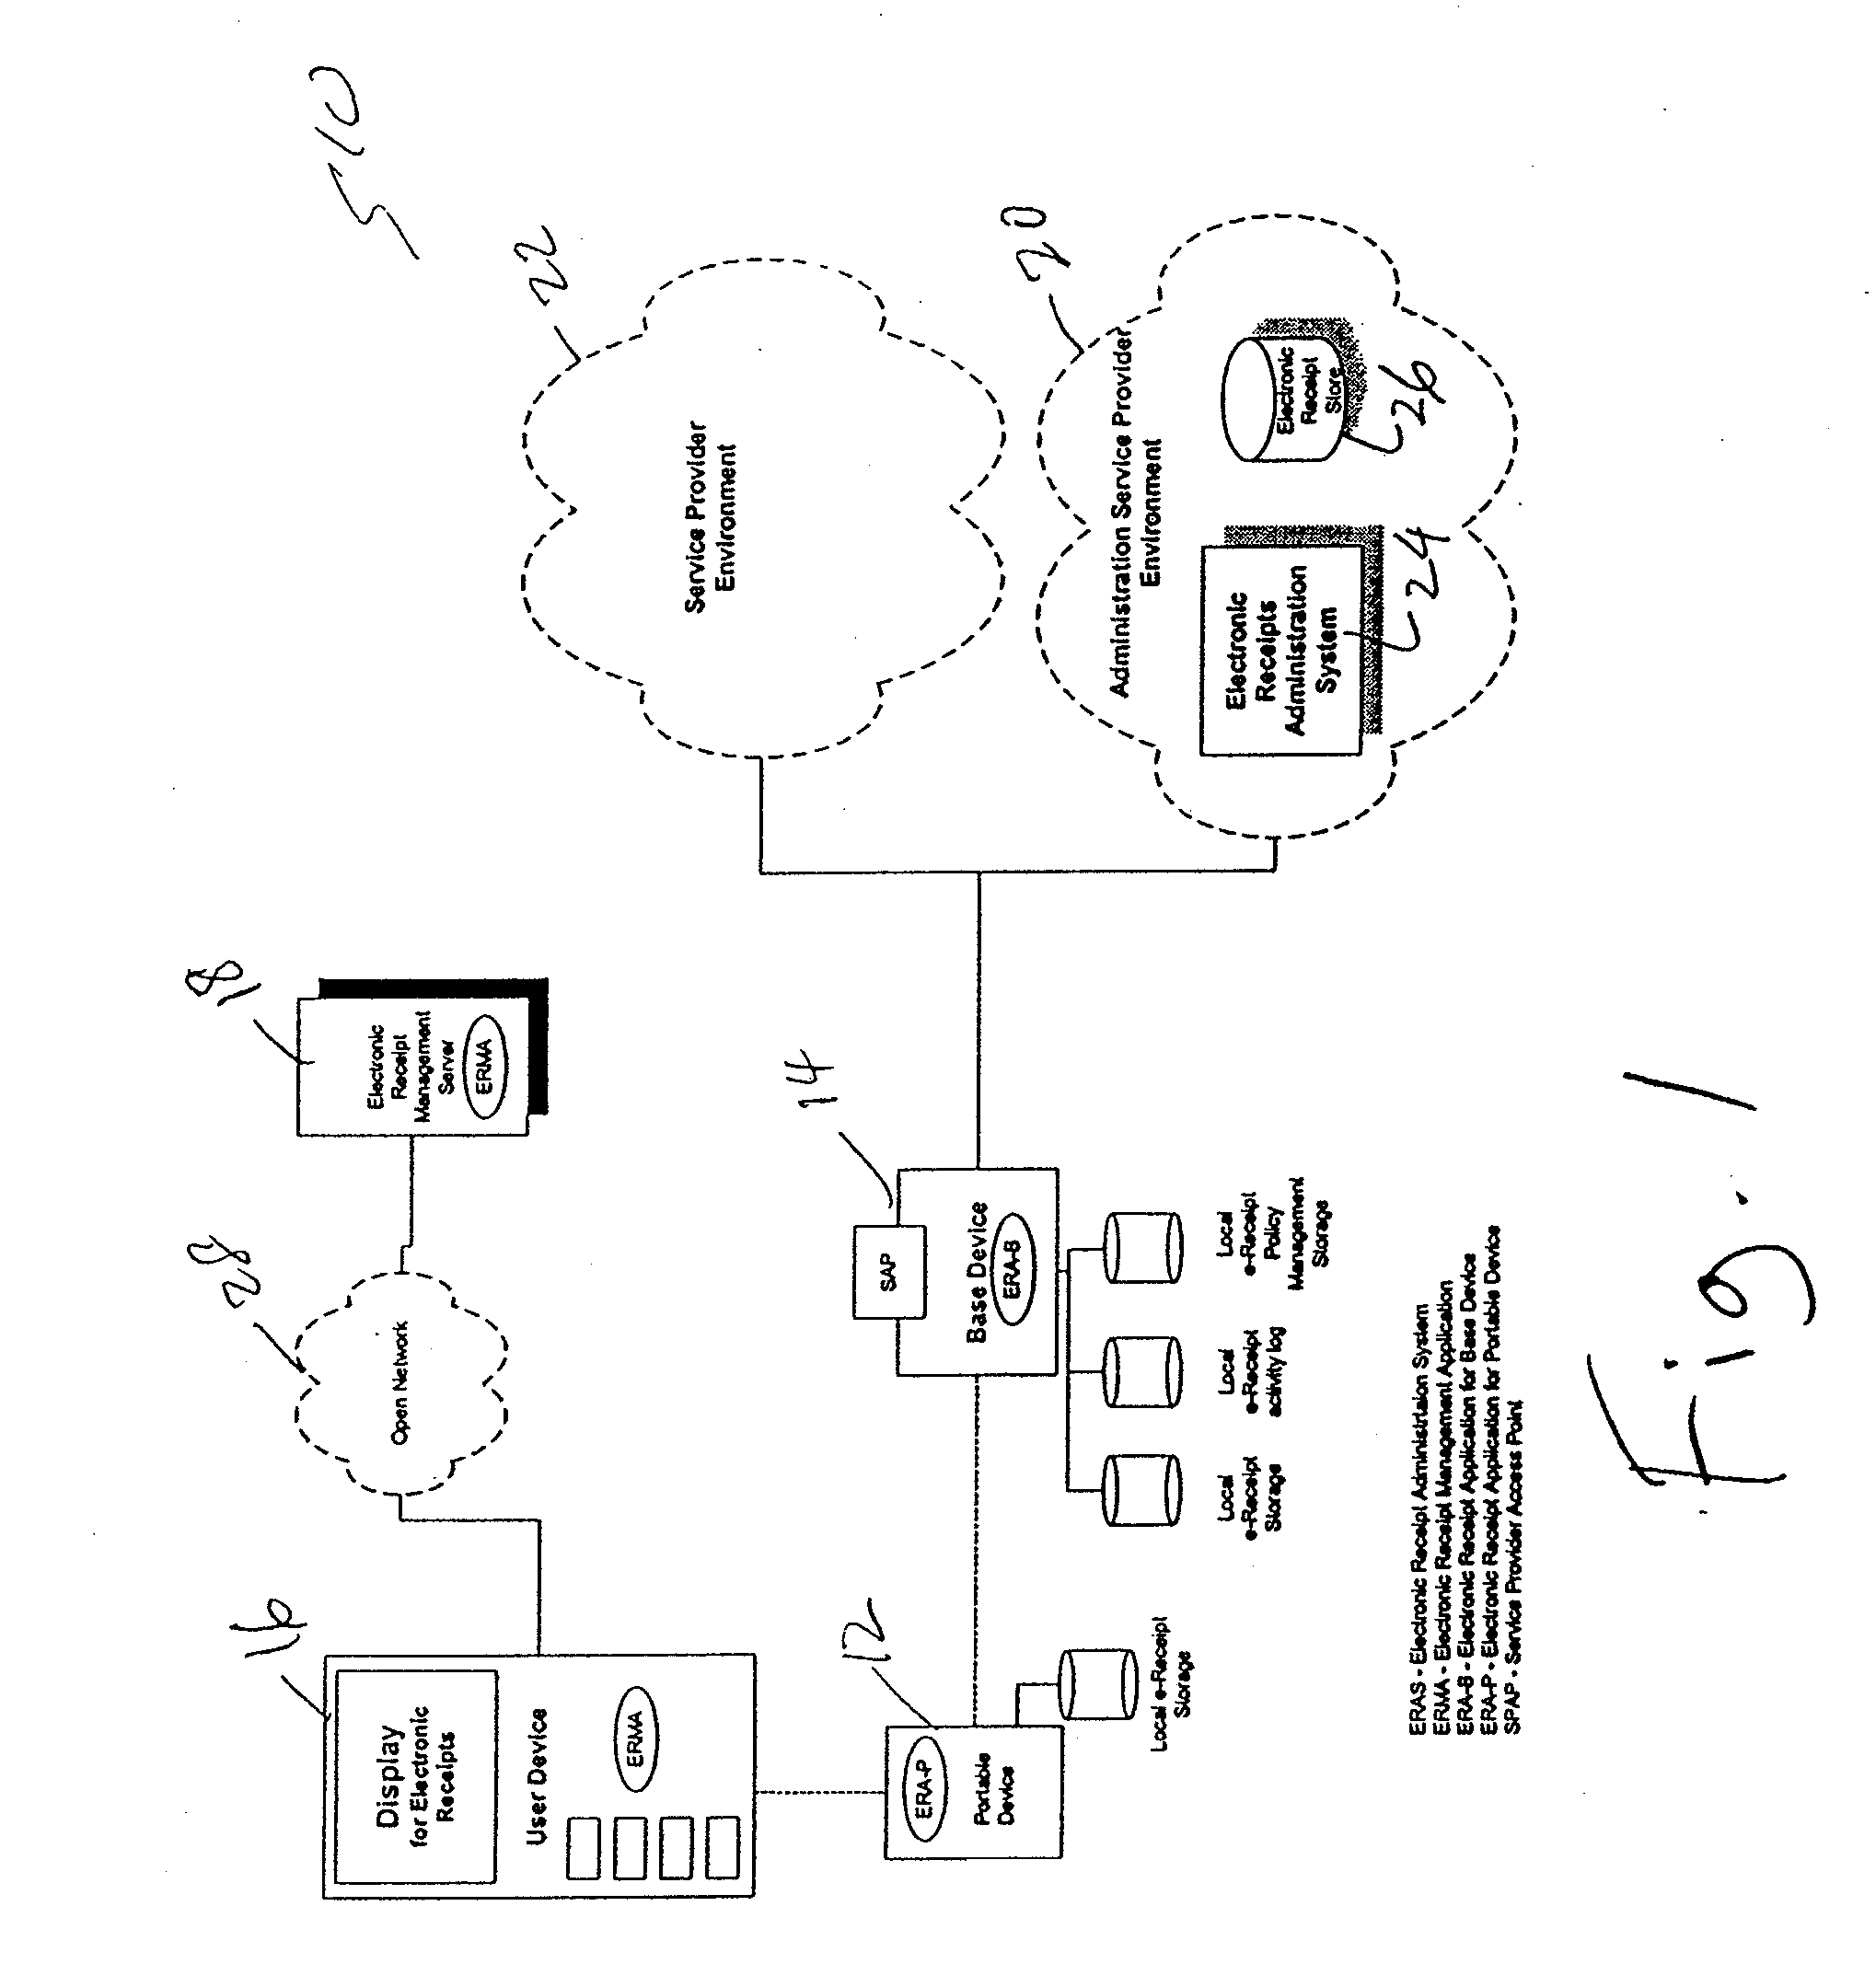 Method and Server for Management of Electronic Receipts